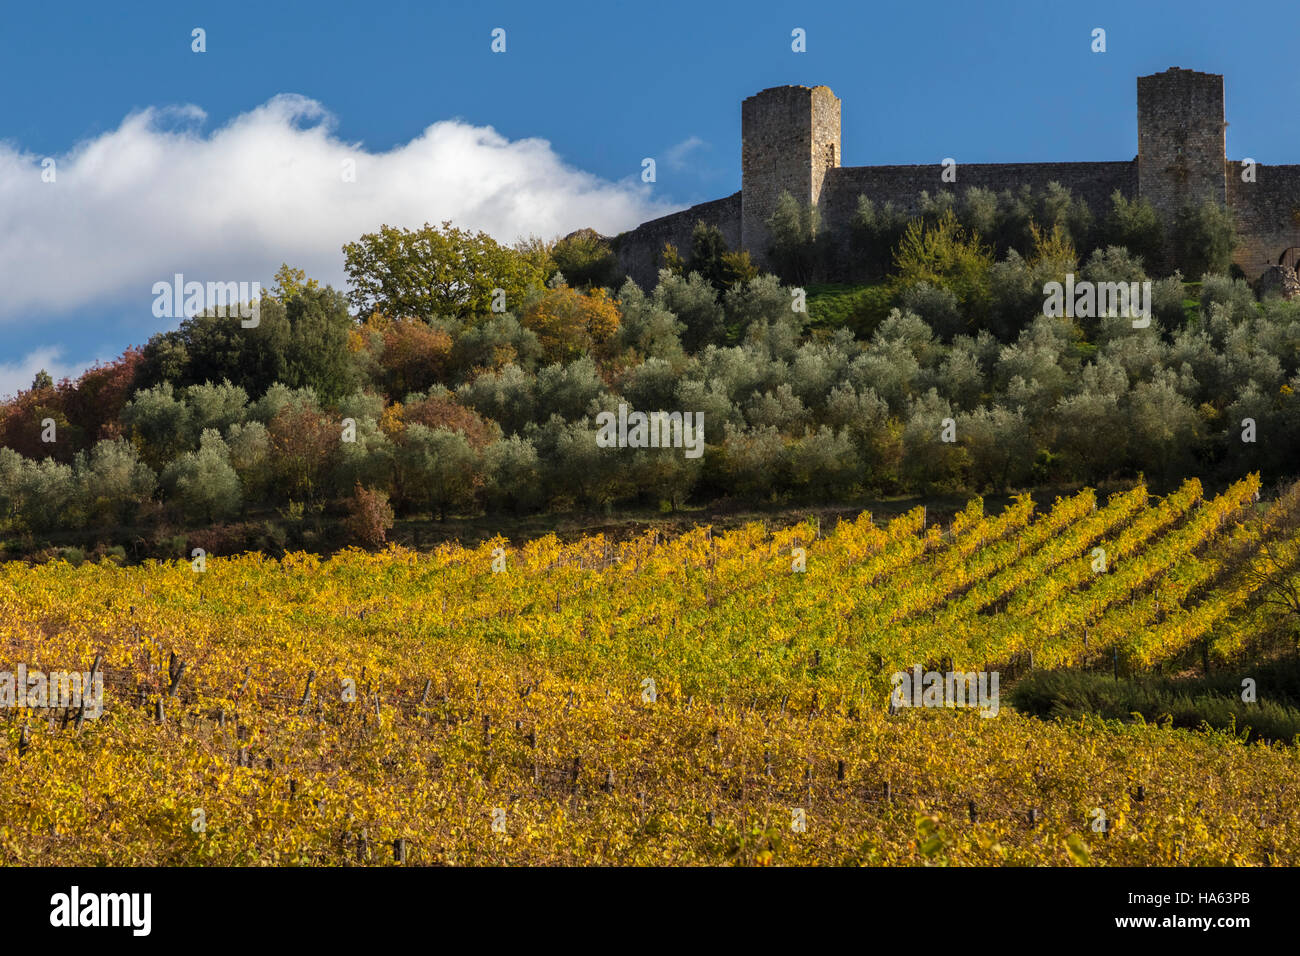 Autumnal vineyards outside the medieval walls of Monteriggioni, Tuscany, Italy. Stock Photo